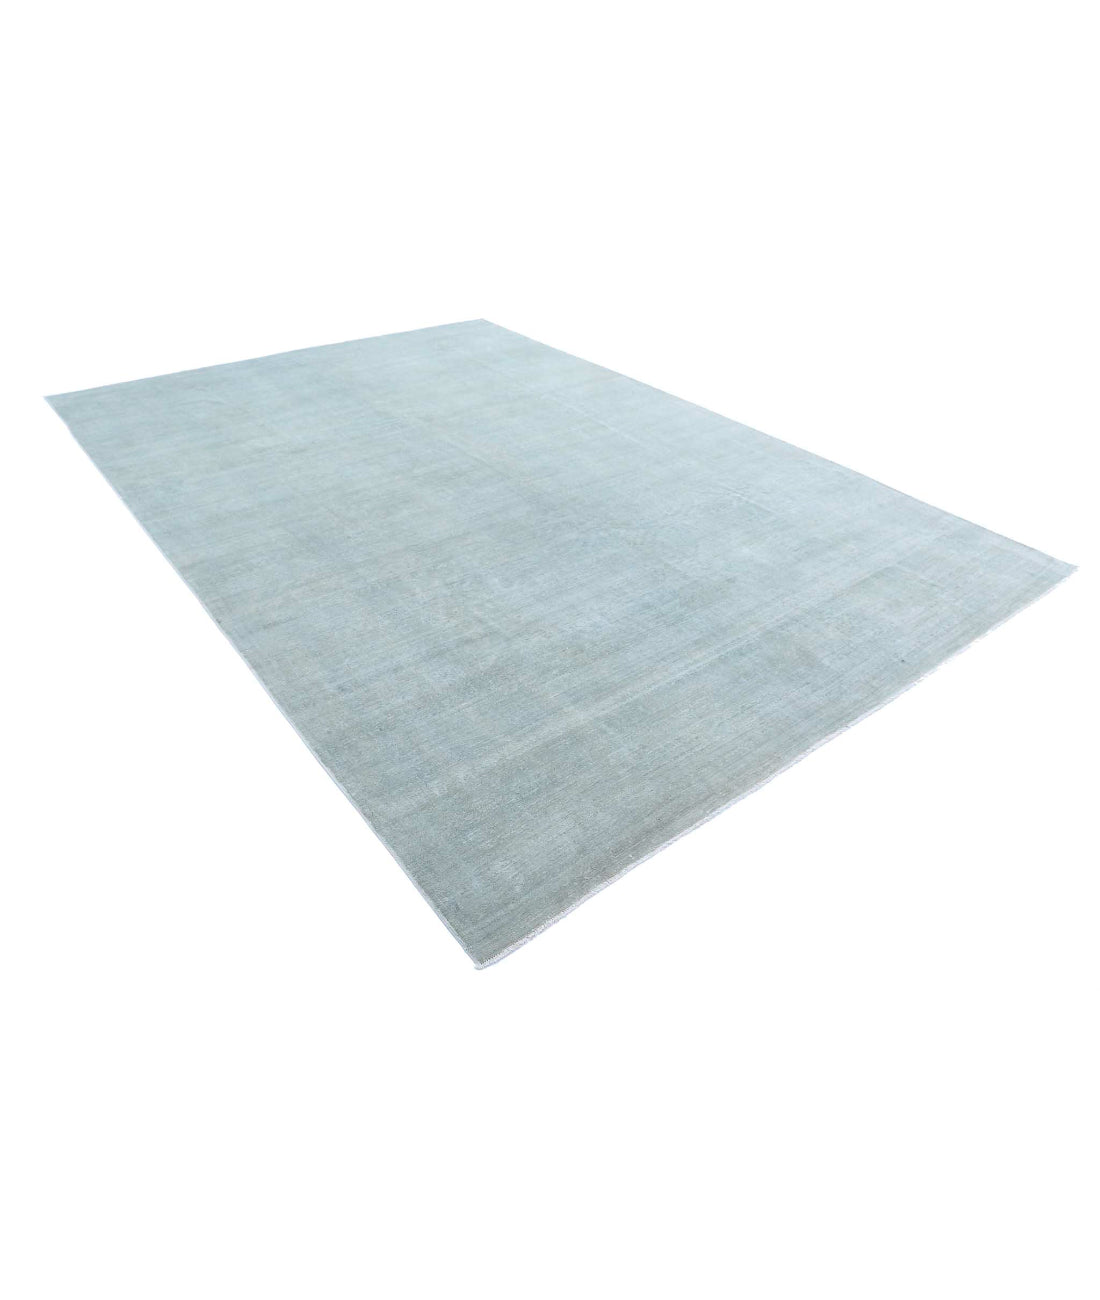 Overdye 8'5'' X 12'0'' Hand-Knotted Wool Rug 8'5'' x 12'0'' (253 X 360) / Grey / N/A